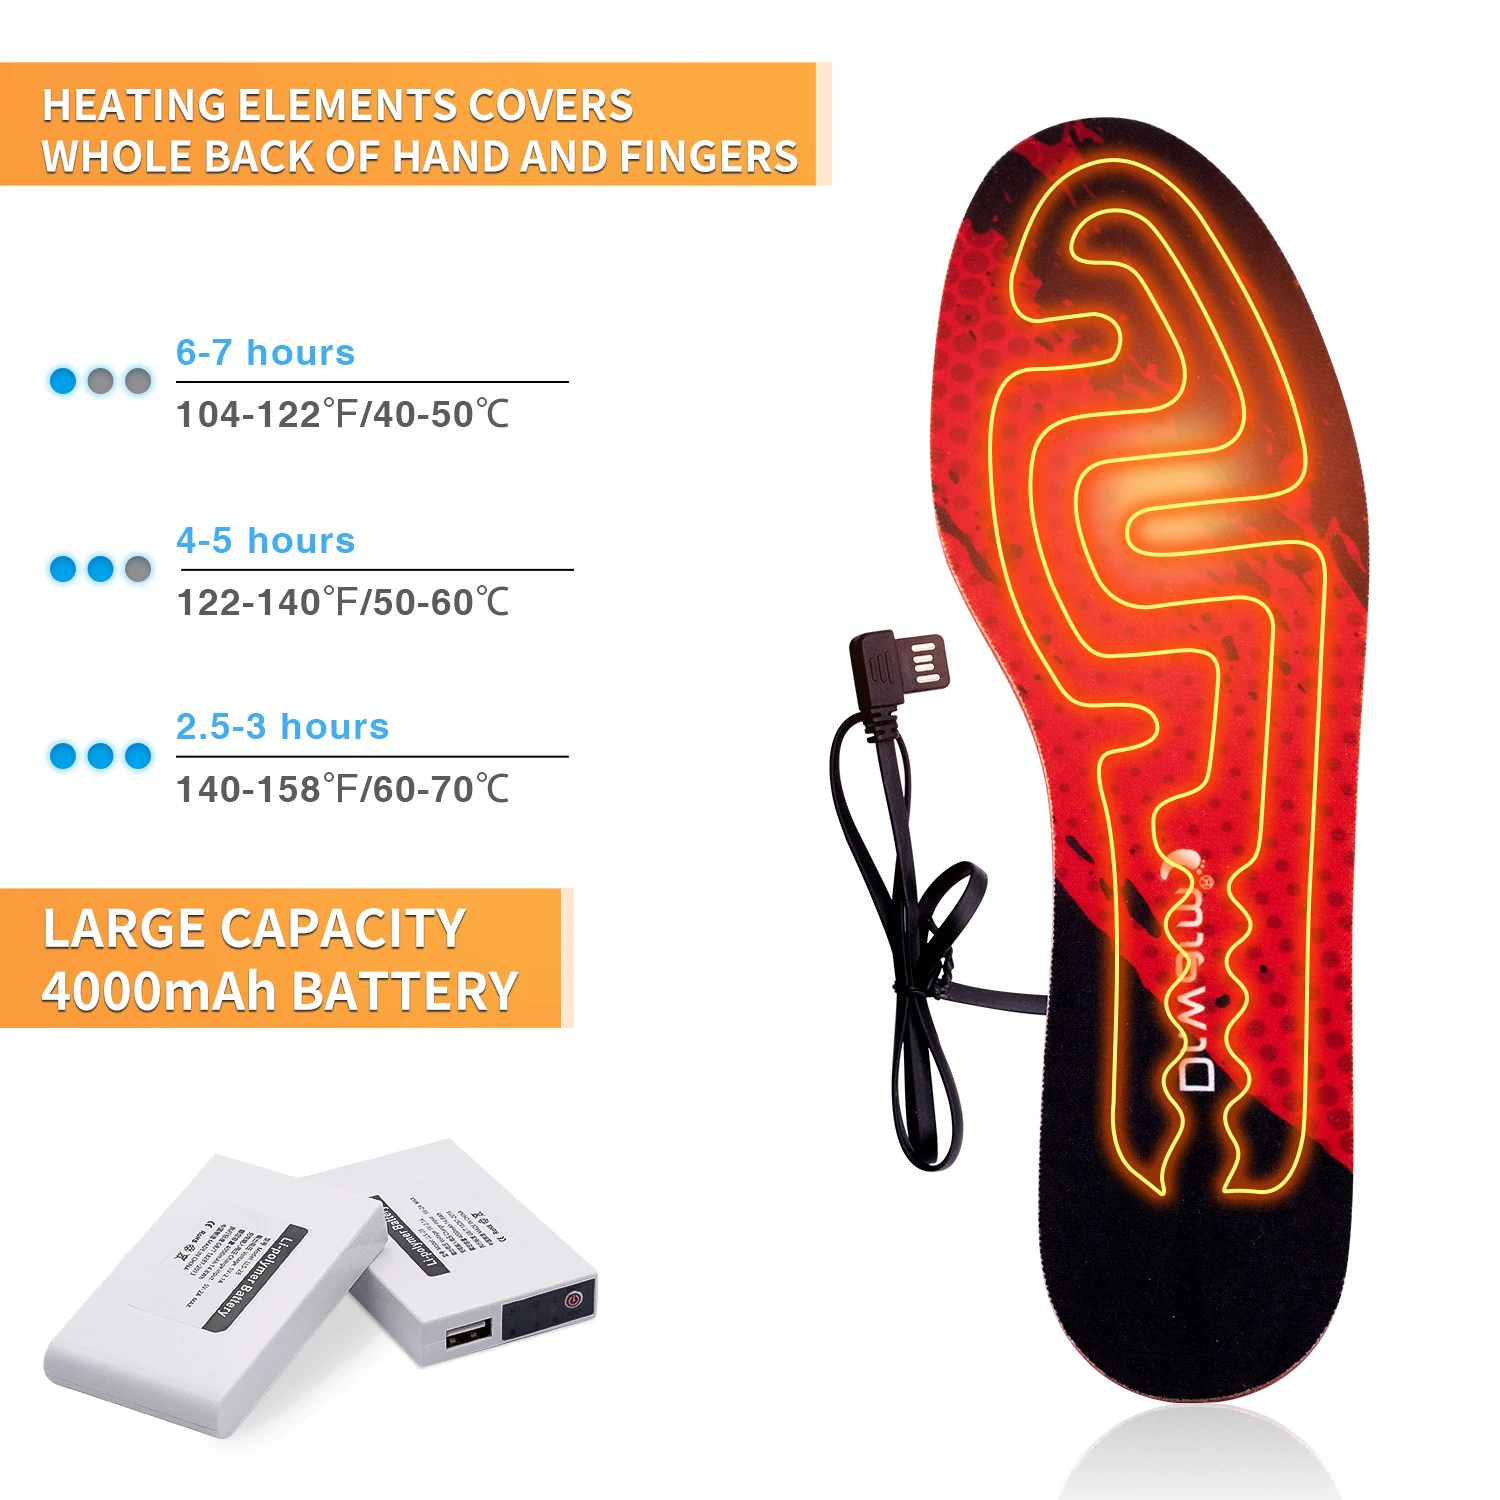 Dr. Warm battery heated insoles